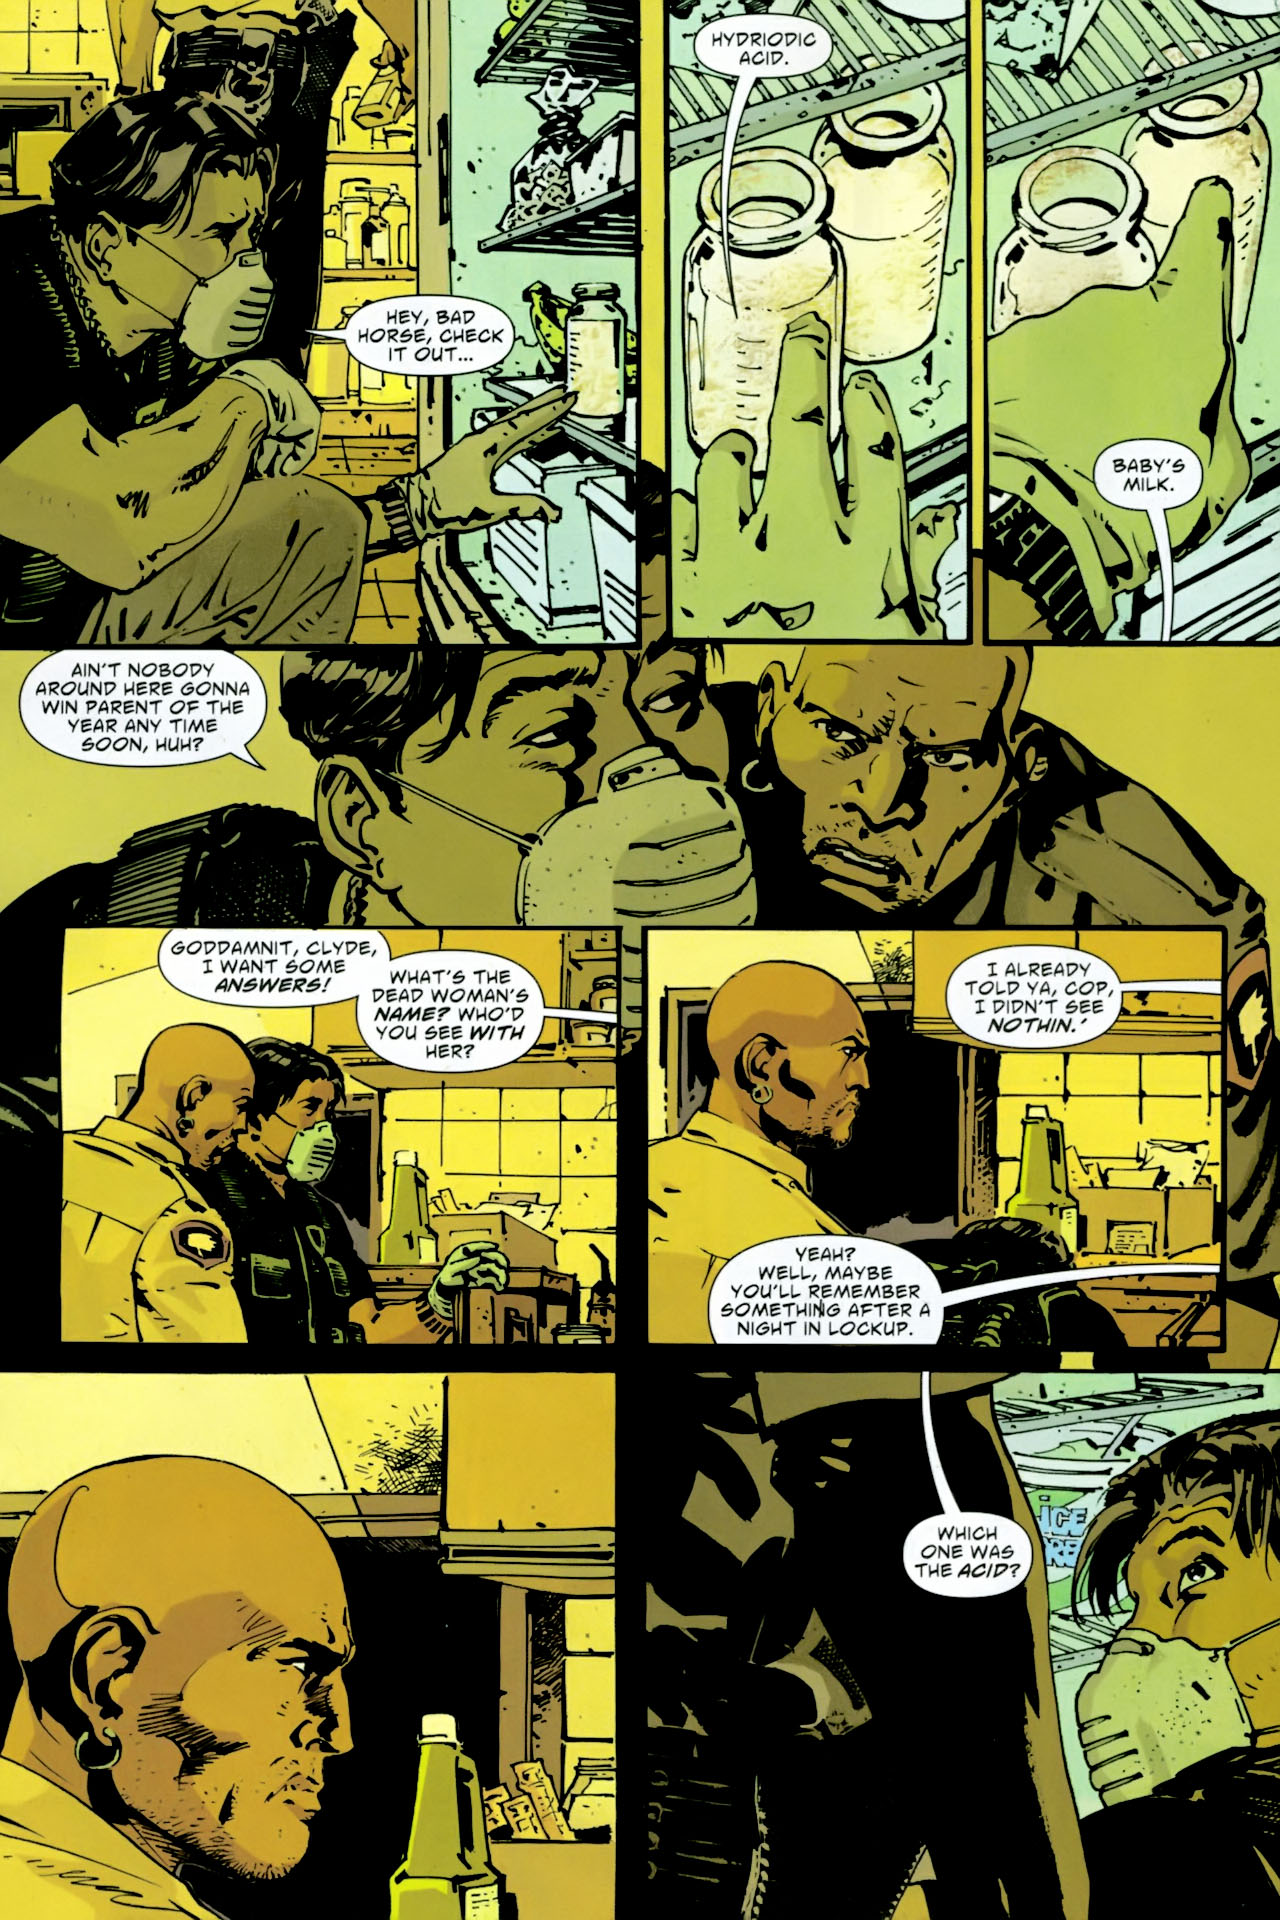 Scalped #13 - Dead Mothers, Part 1 of 5